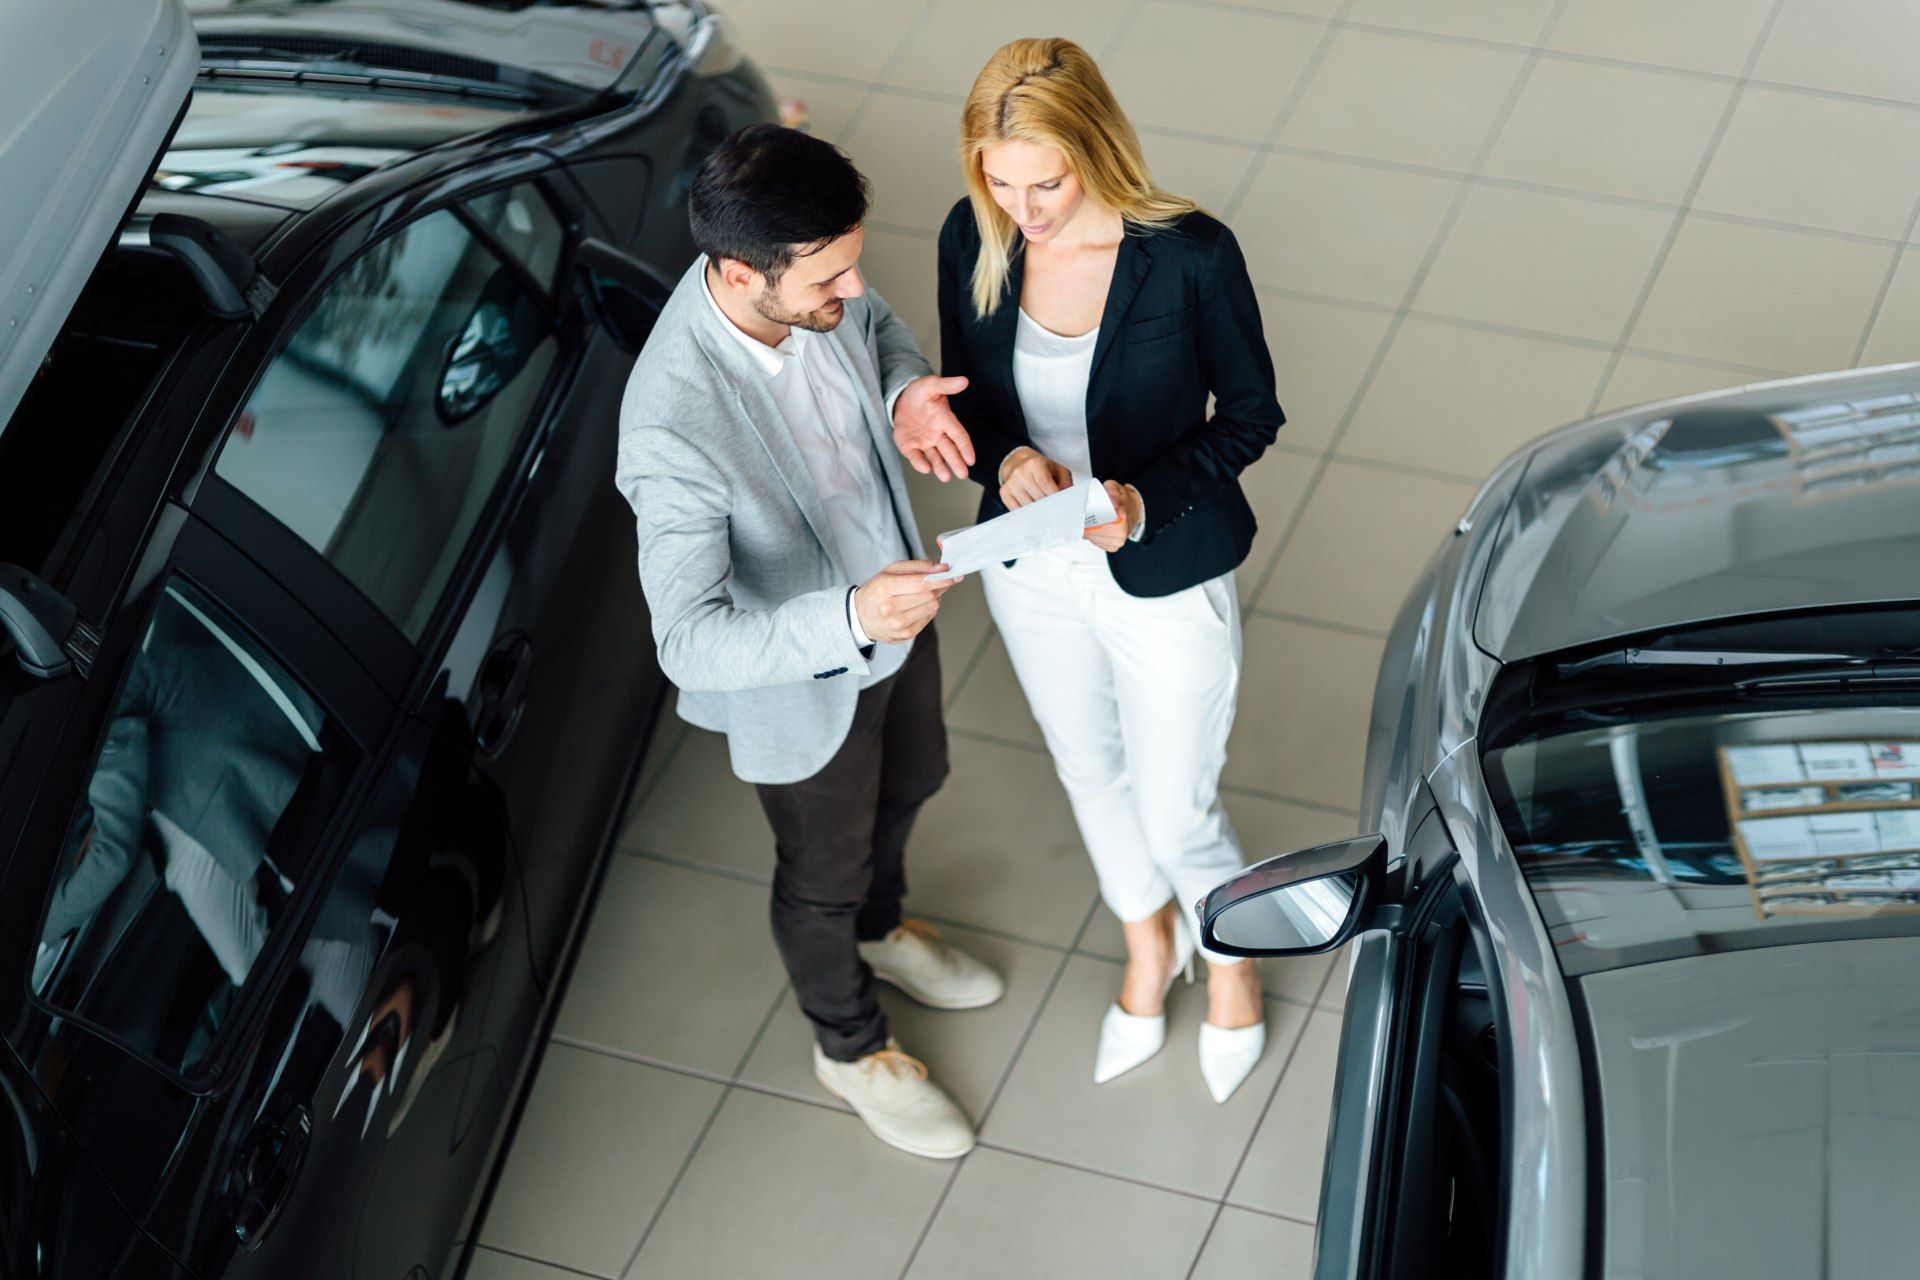 A salesperson and a customer talk over a paper while standing in a car dealership showroom - reynolds